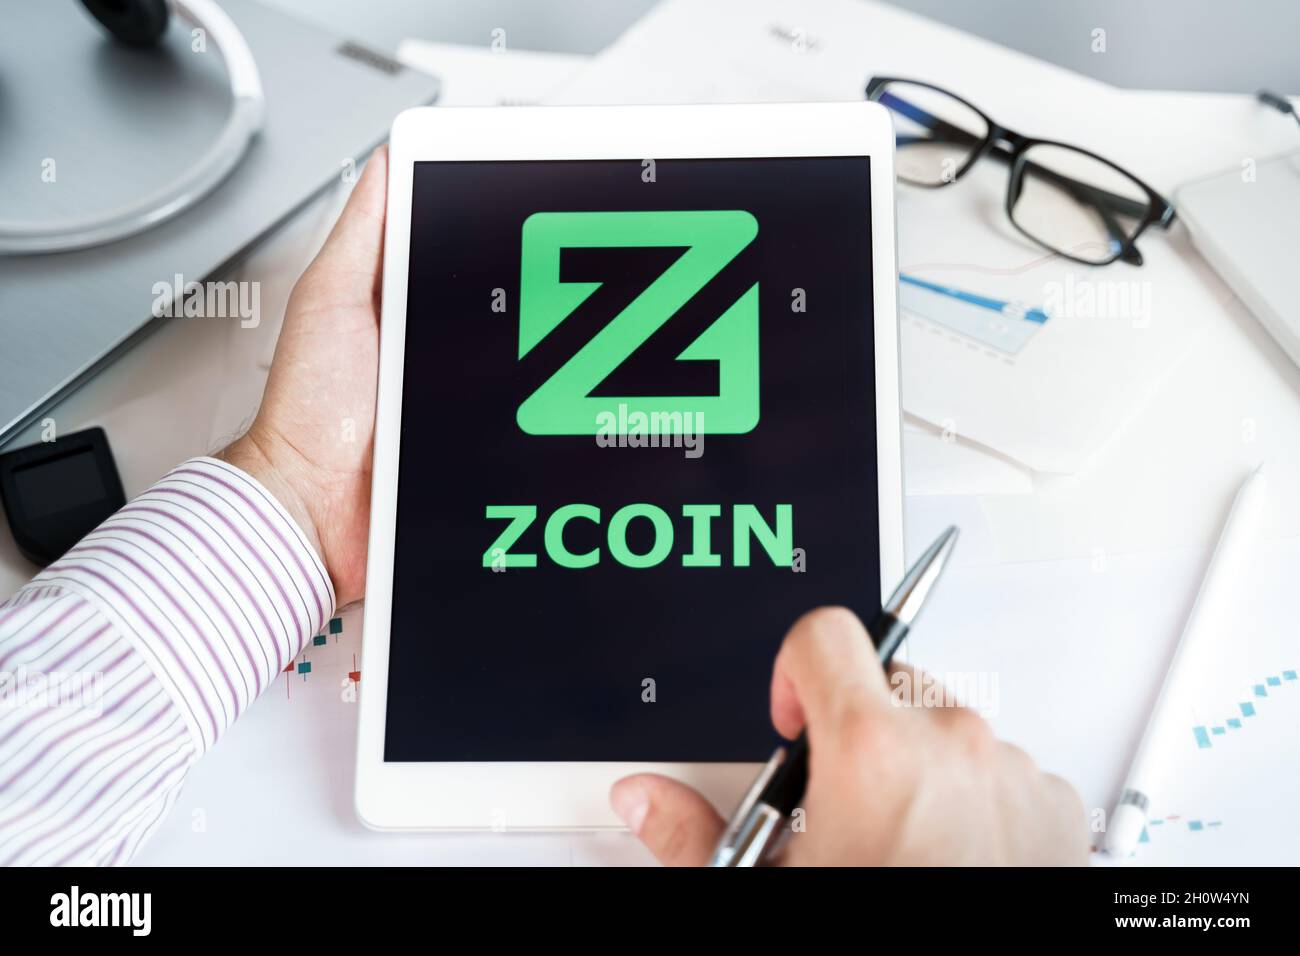 Moscow Russia 20.07.2021 Logo of Zcoin coin in mobile phone. Cryptocurrency XZC, Firo token. Trading blockchain platform to buy,sell on decentralized Stock Photo